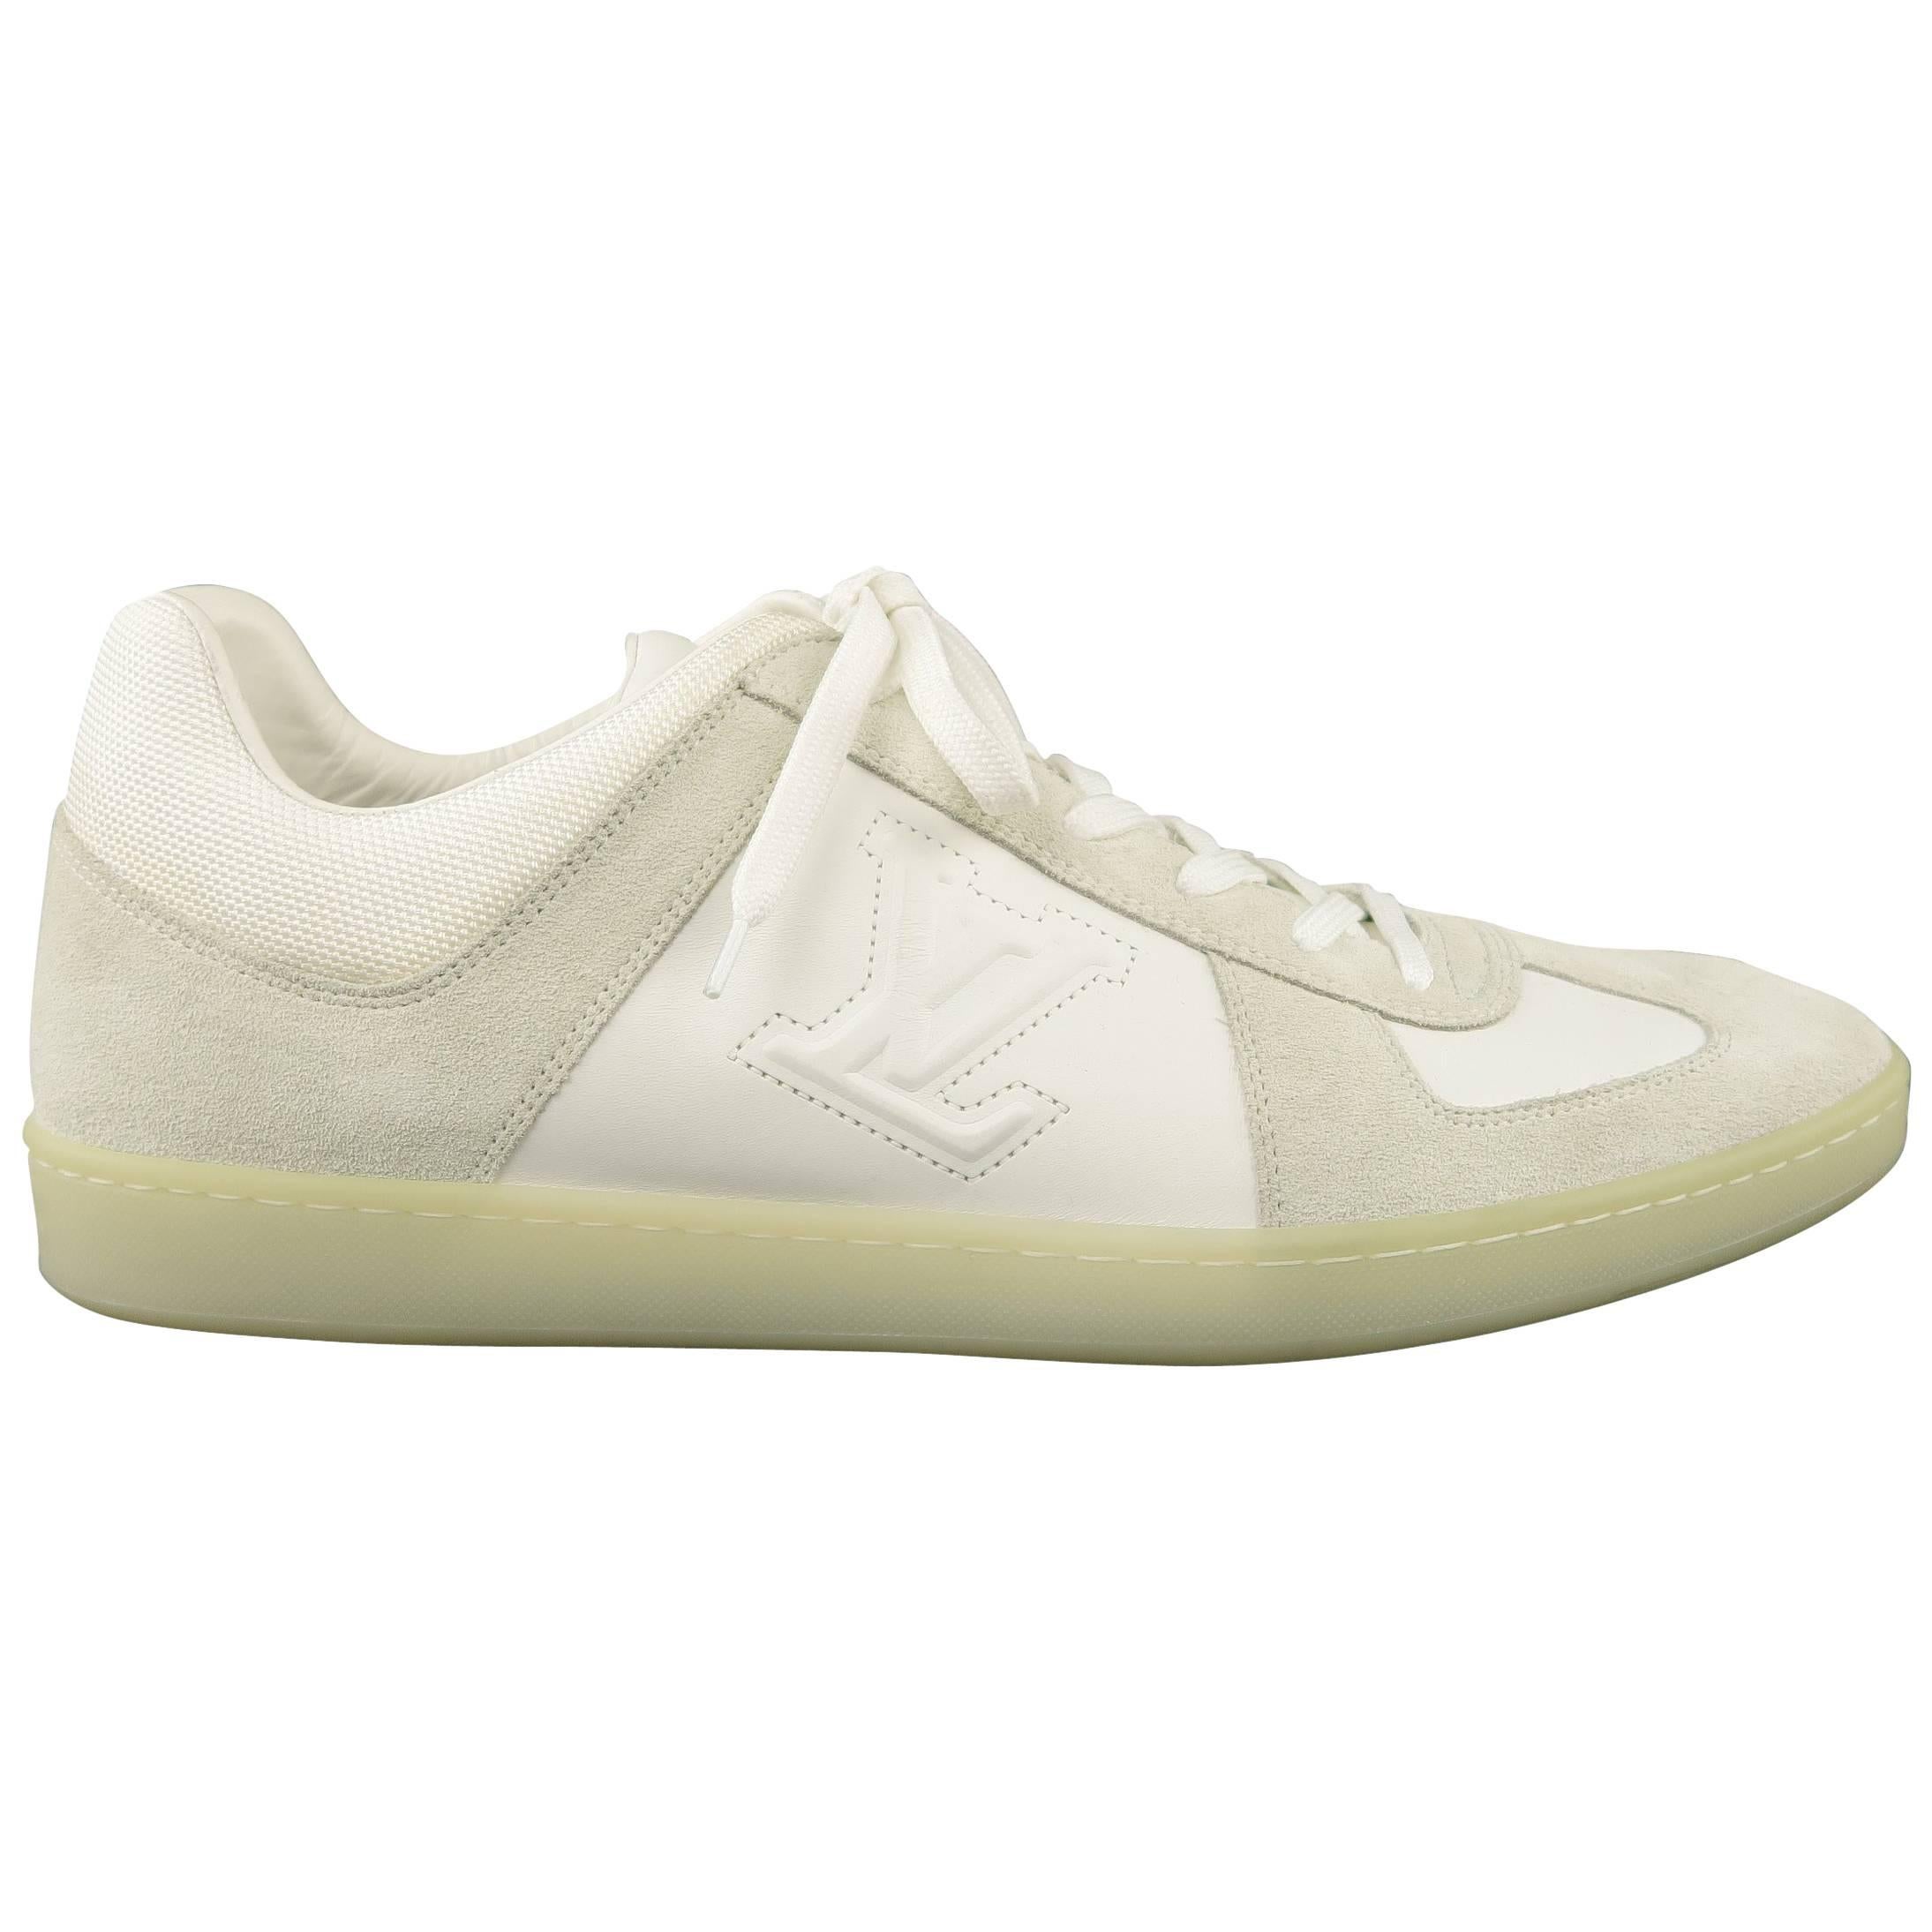 Louis Vuitton Lv Trainer White - For Sale on 1stDibs  fake louis vuitton  trainers, louis vuitton lv trainer white black, pink lv trainers